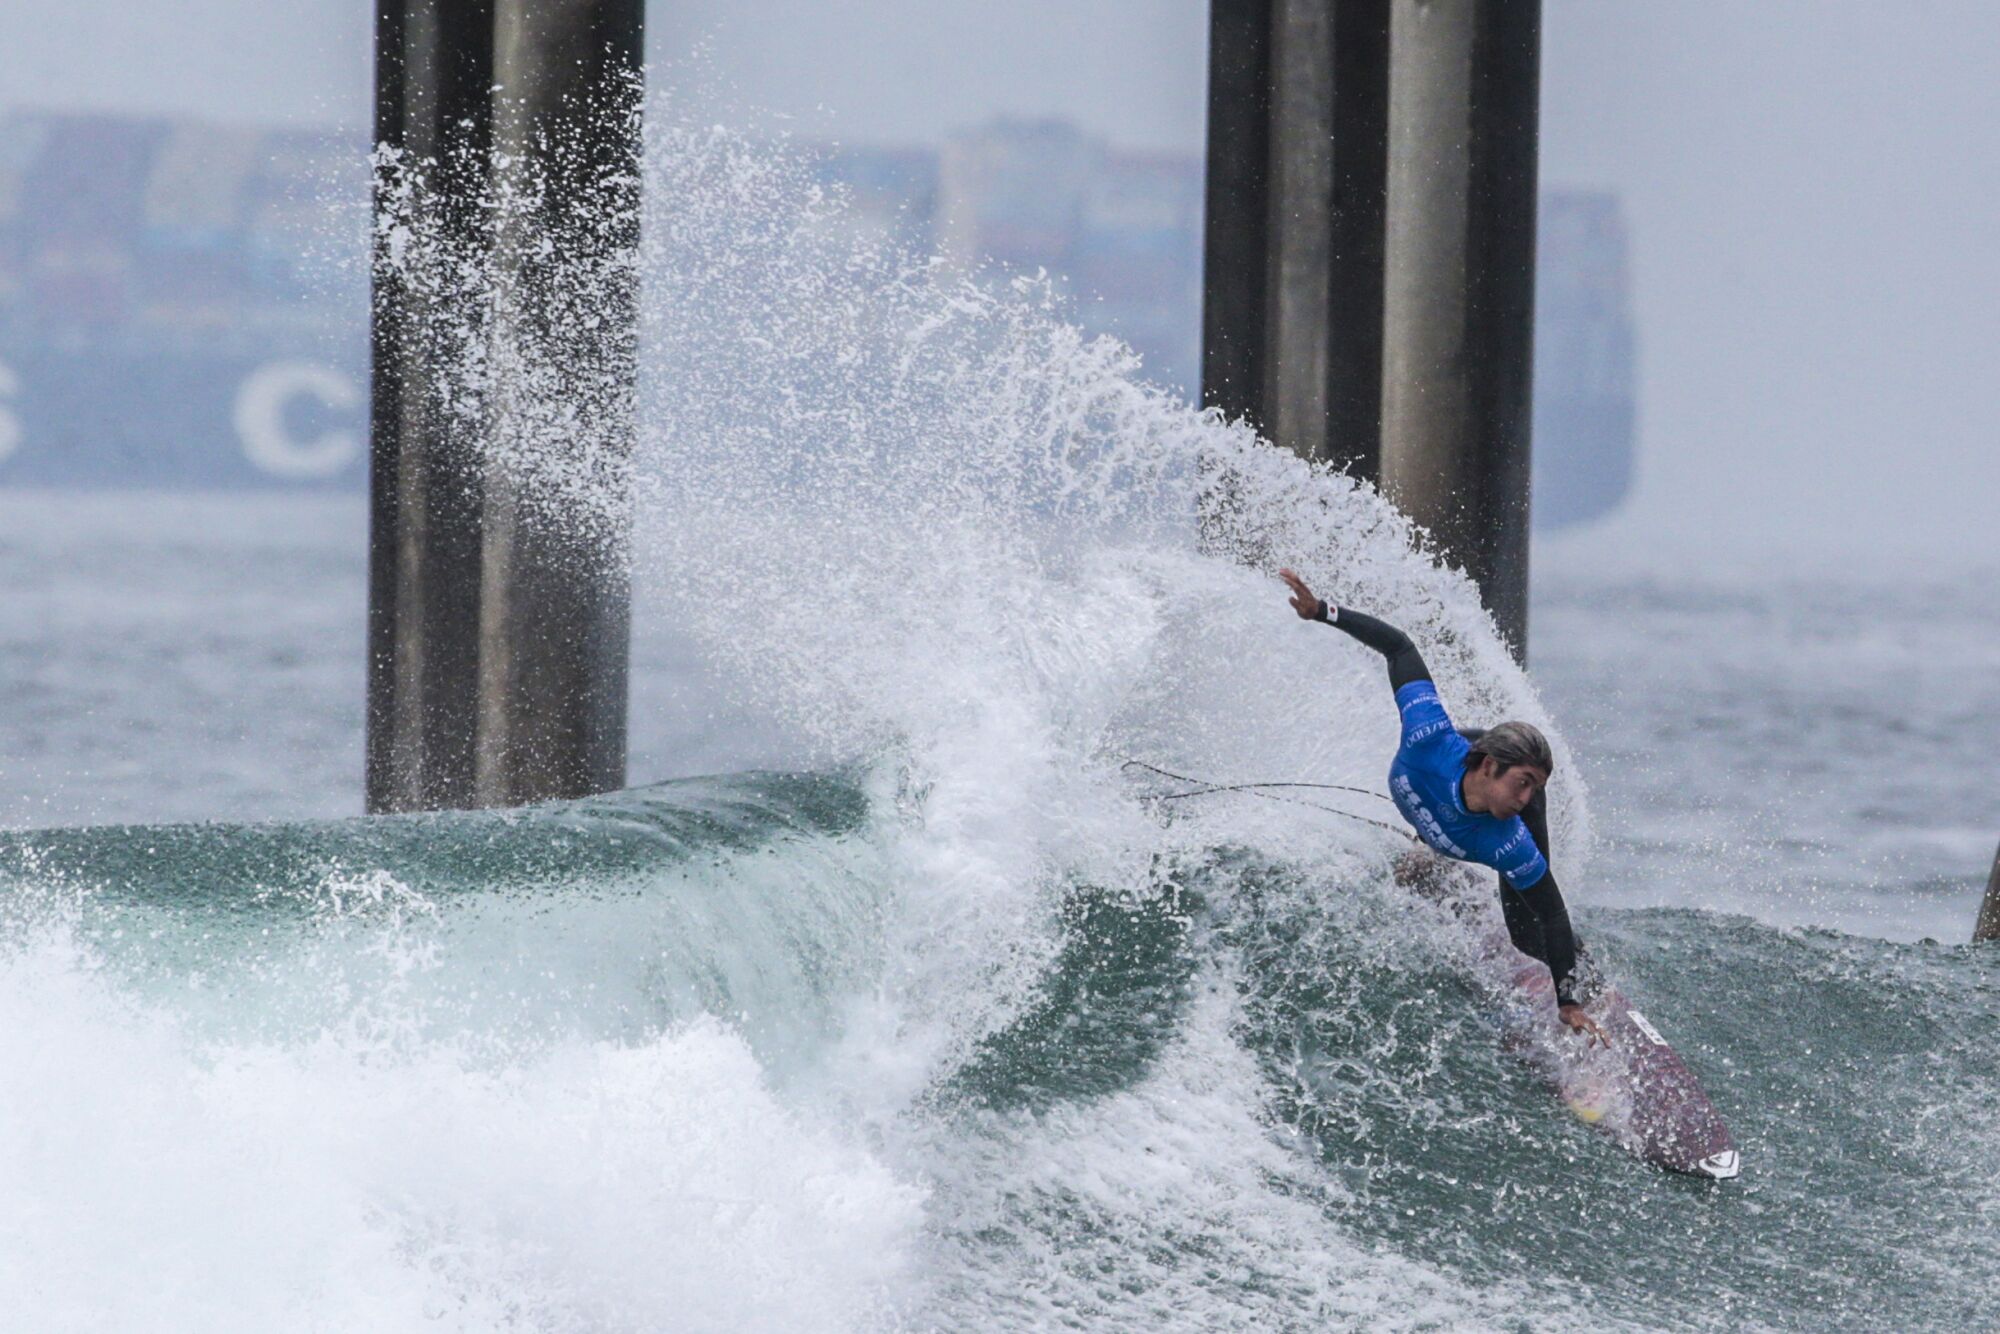 Kanoa Igarashi competes in a quarterfinal heat at the U.S. Open of Surfing